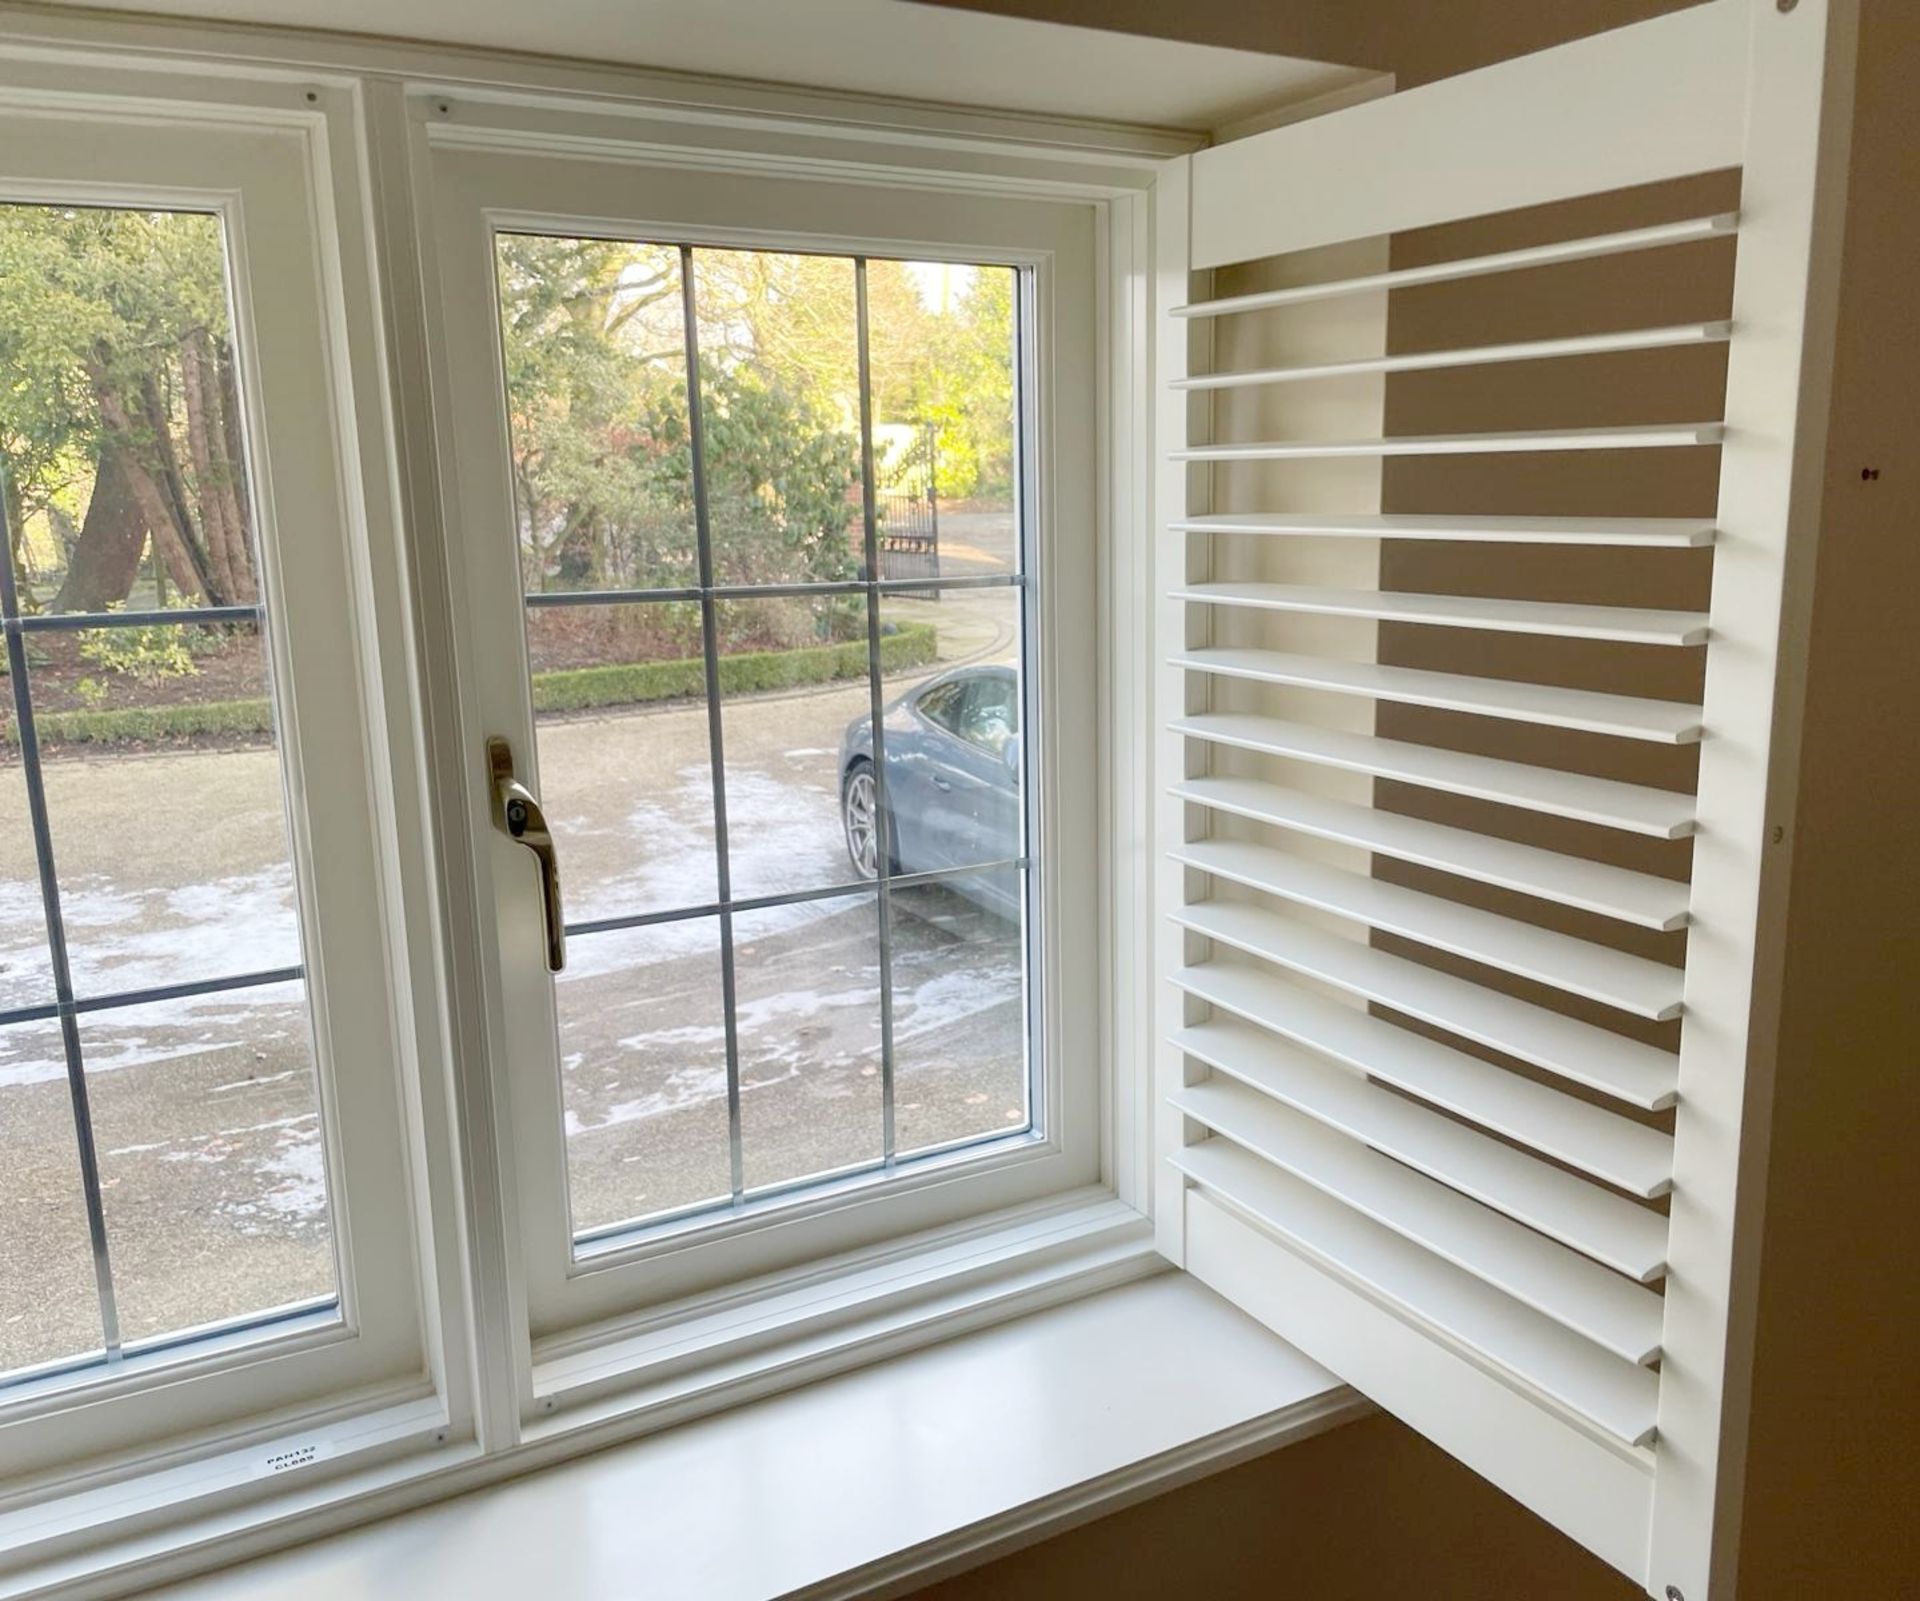 1 x Hardwood Timber Double Glazed Leaded 3-Pane Window Frame fitted with Shutter Blinds - Image 8 of 15